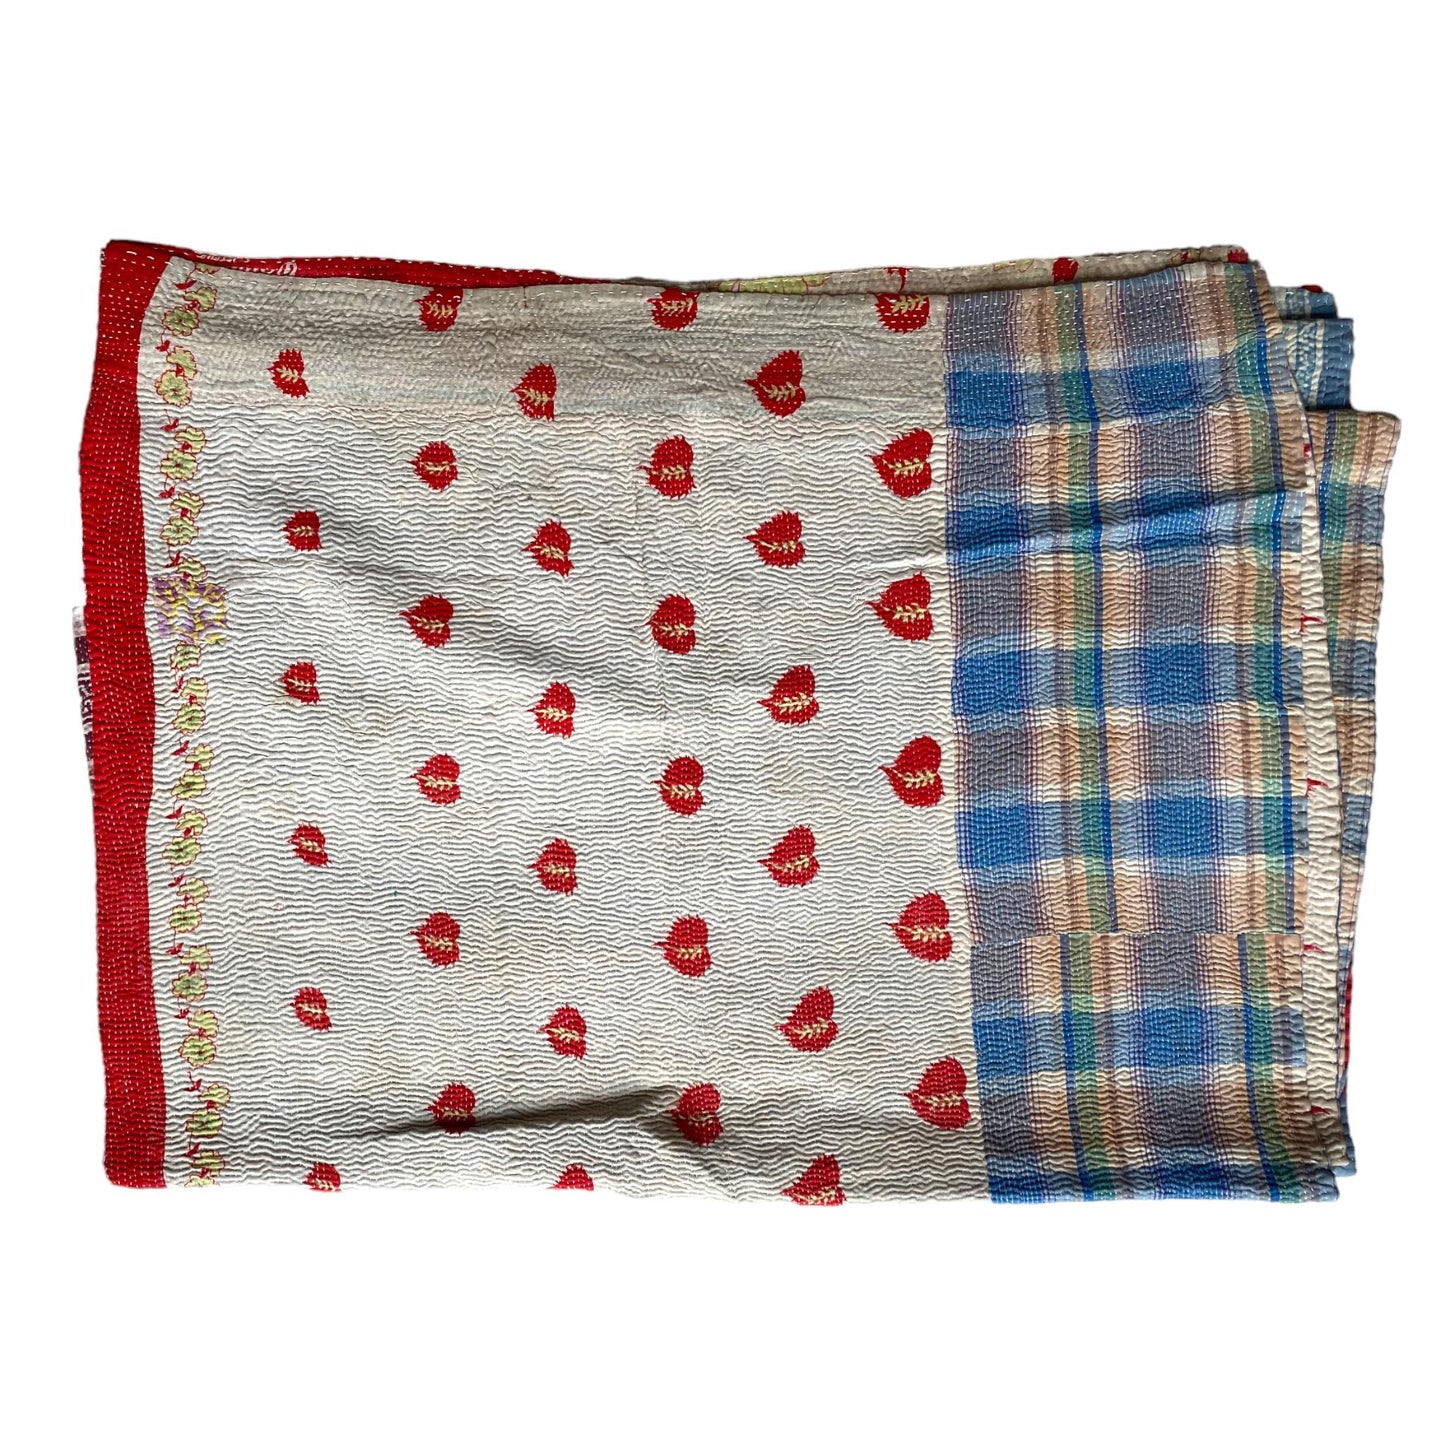 Red and white kantha quilt